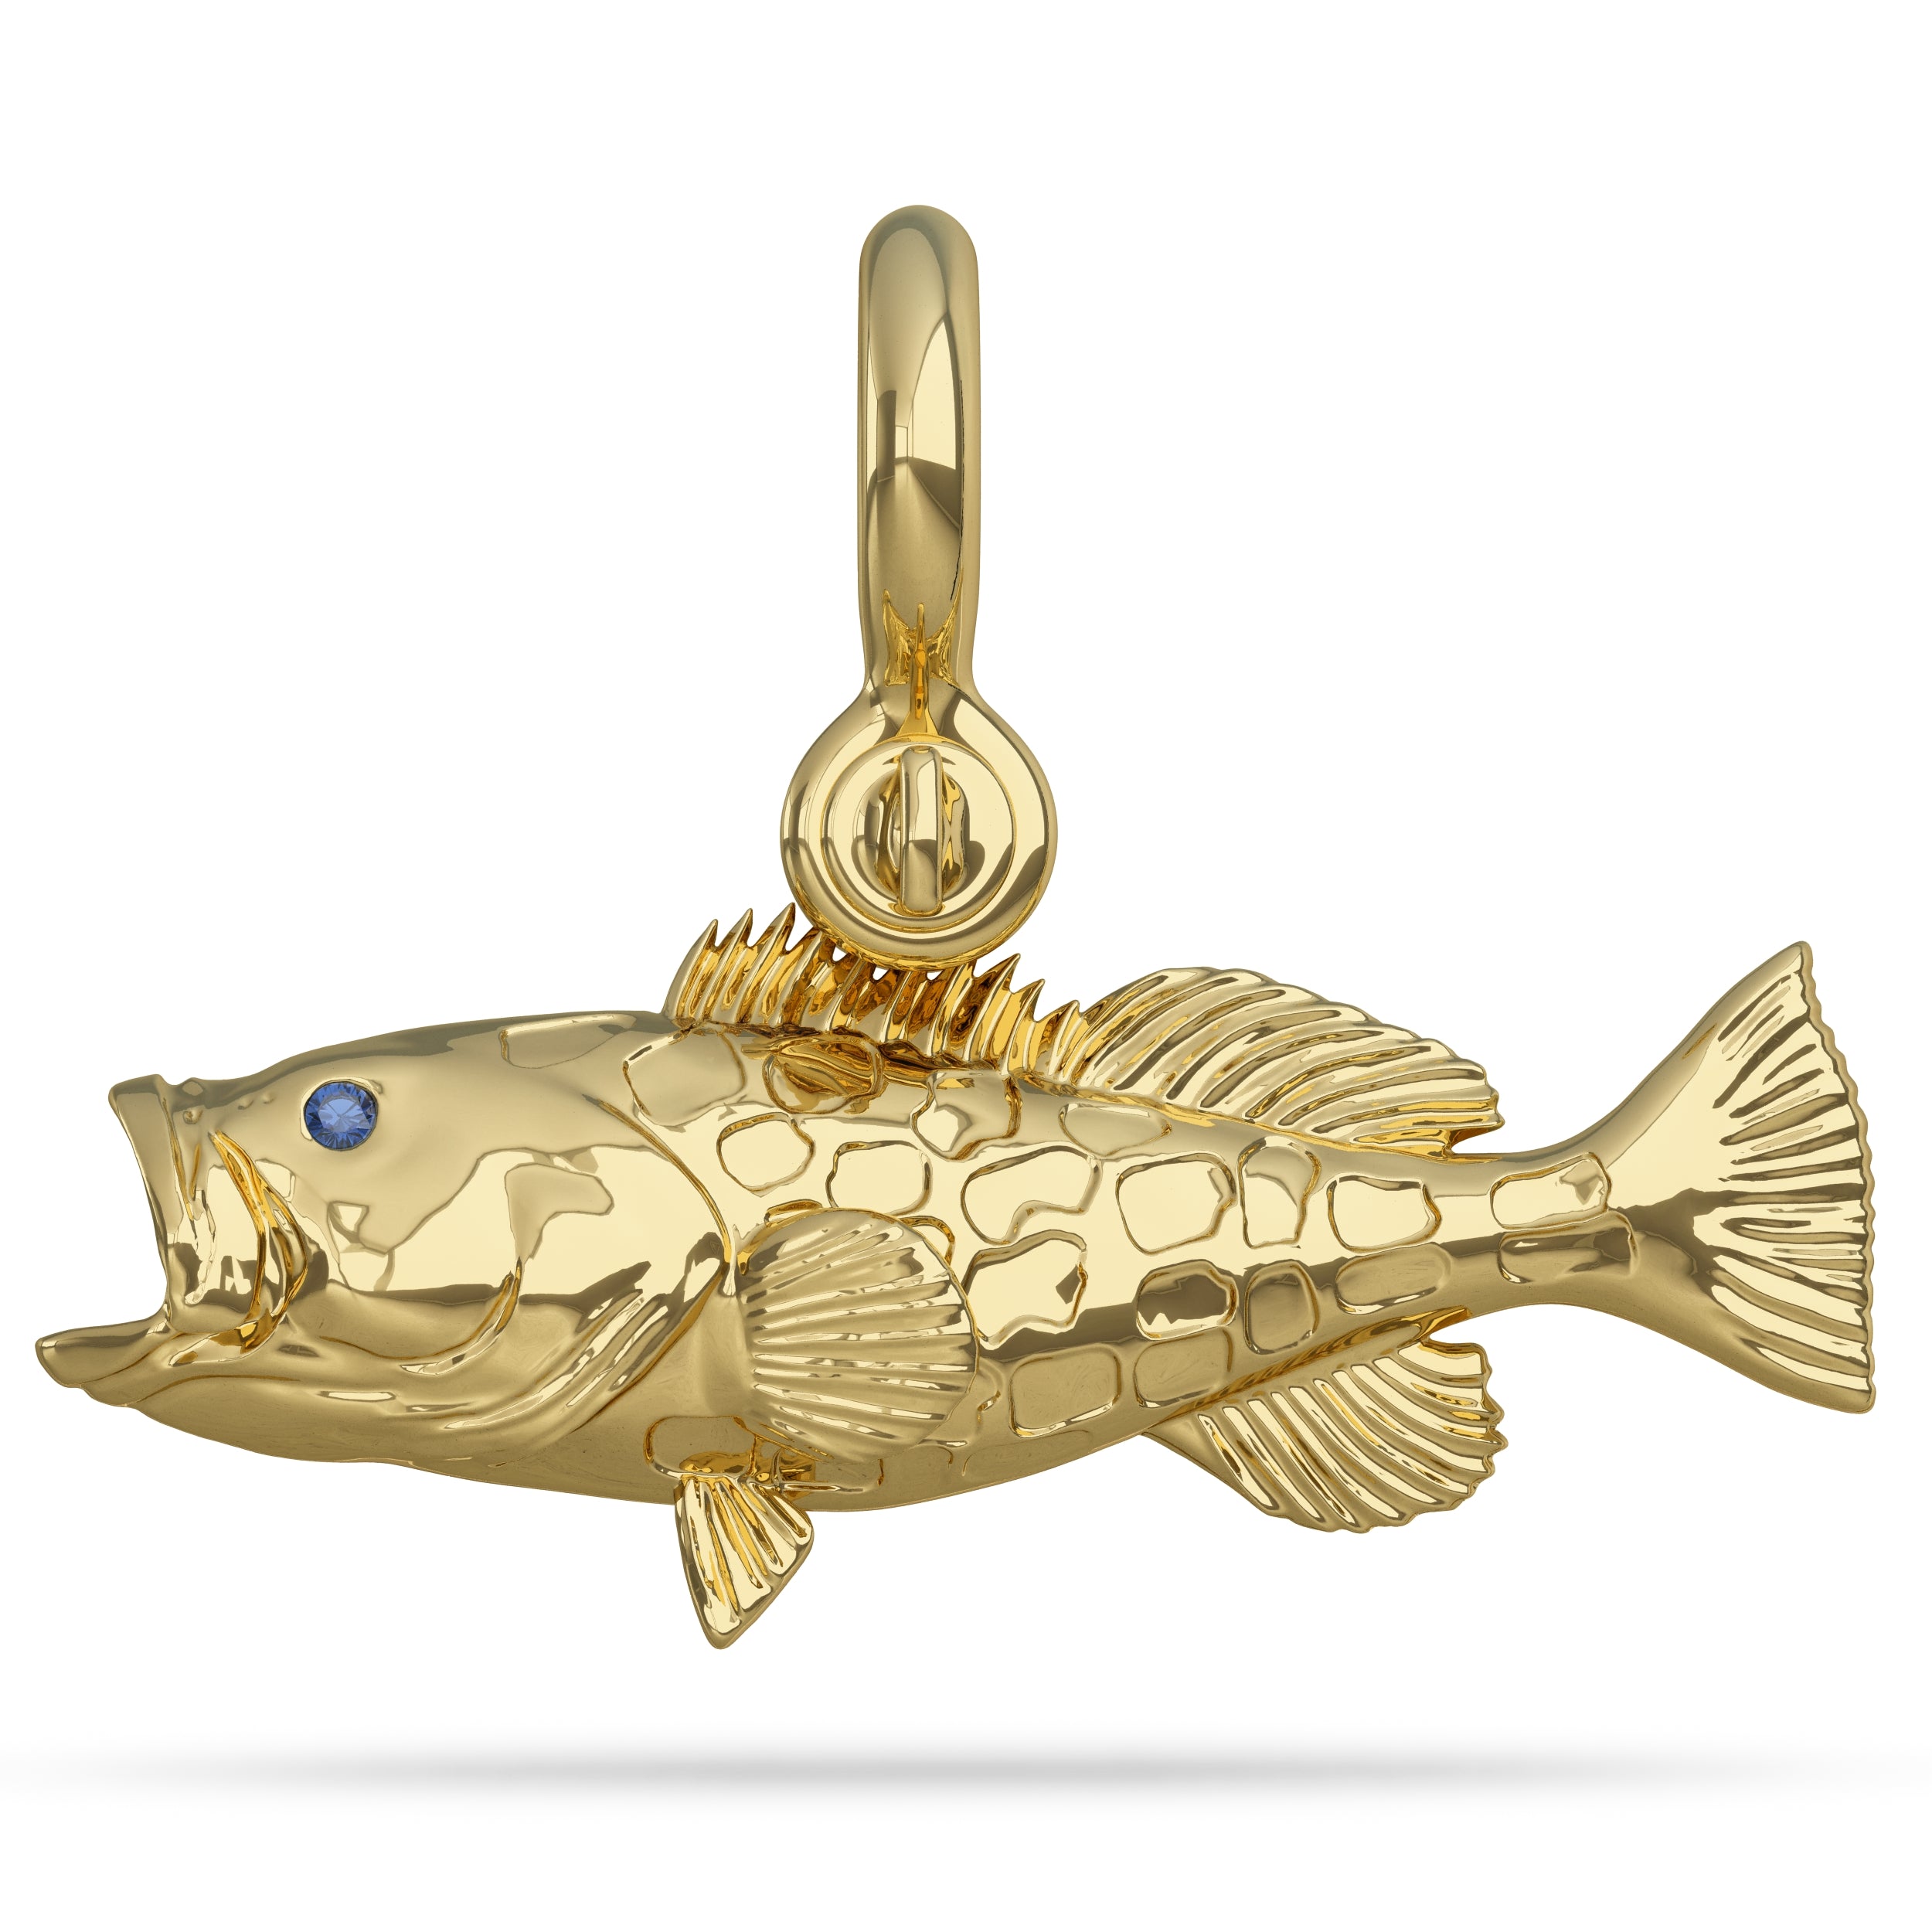 Solid 14k Gold Black Grouper Fish Pendant With Mouth Open High Polished Mirror Finish With Blue Sapphire Eye And A Mariner Shackle Bail Custom Designed By Nautical Treasure Jewelry In The Florida Keys 